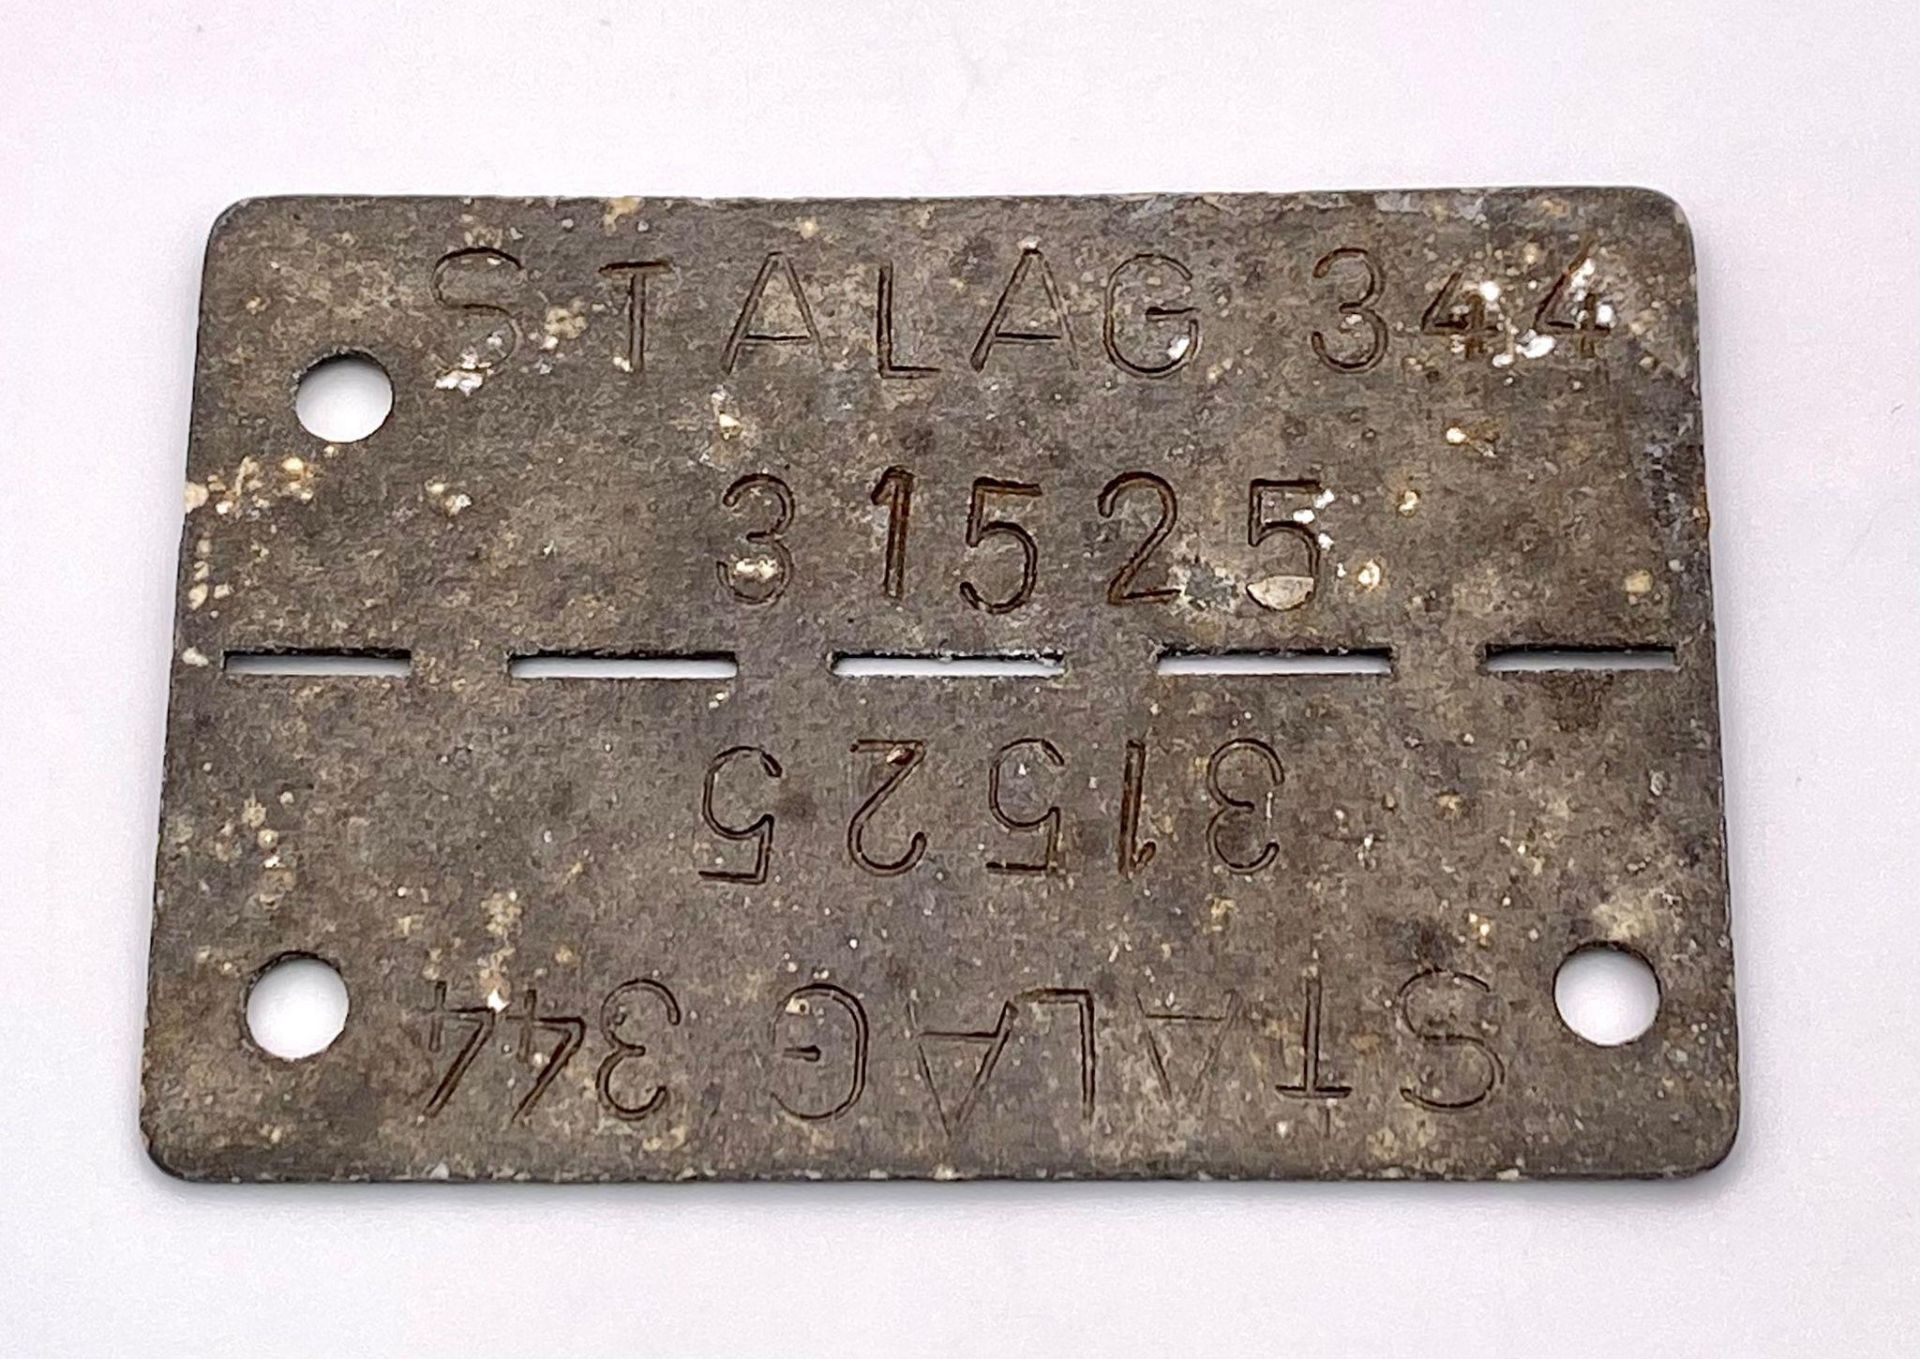 WW2 Prisoner of War Dog Tag for Stalag VIII-B, which was later renumbered Stalag-344, located near